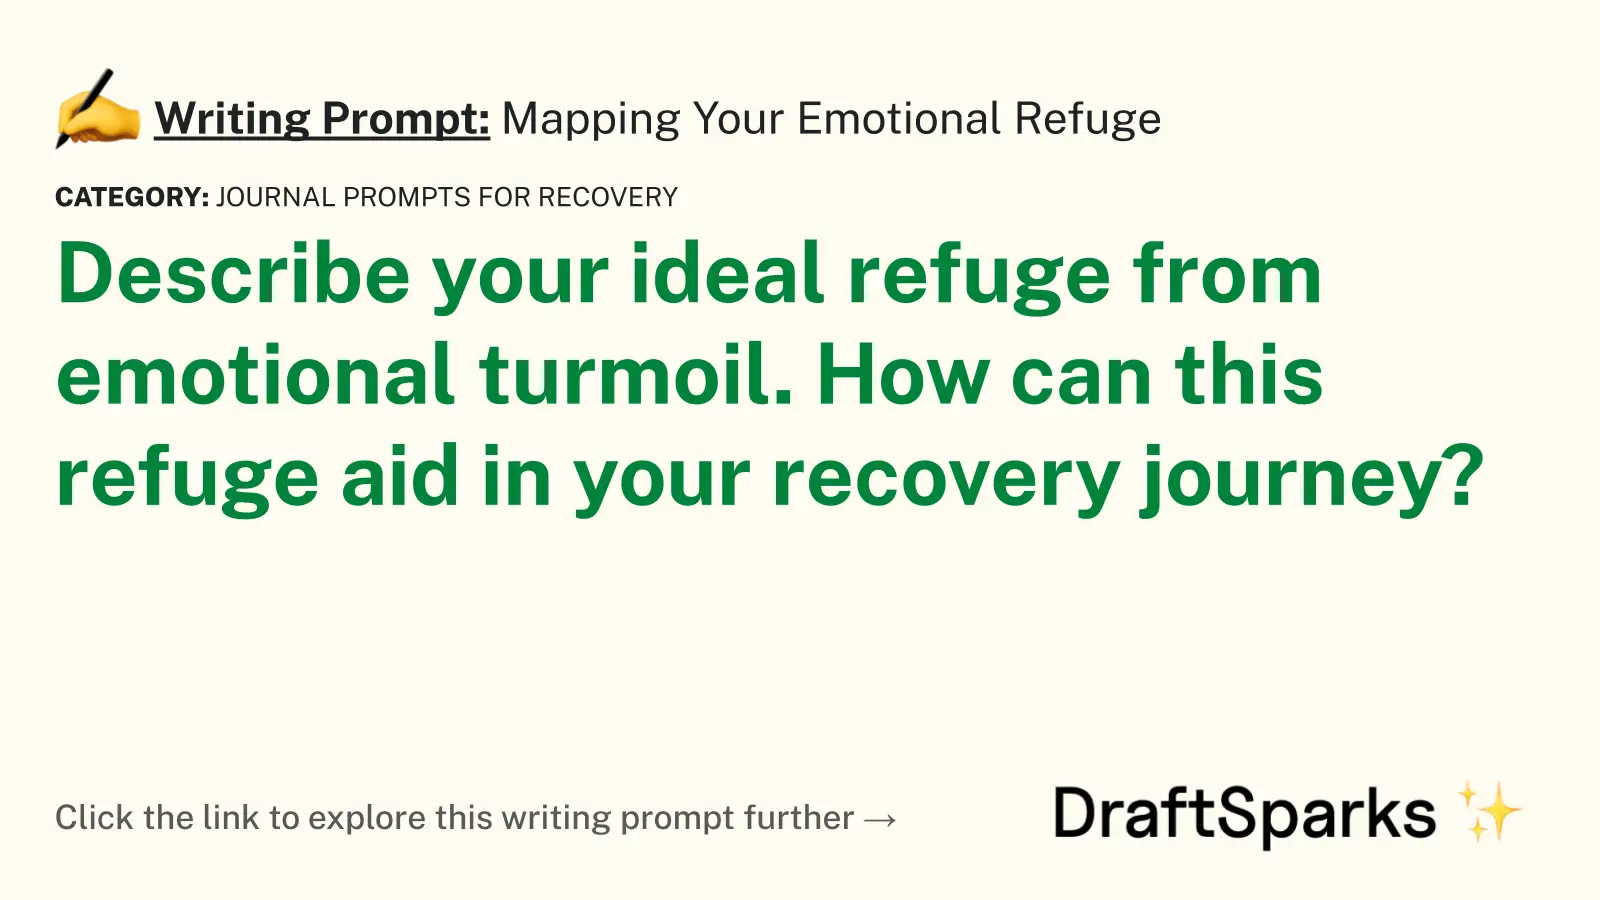 Mapping Your Emotional Refuge